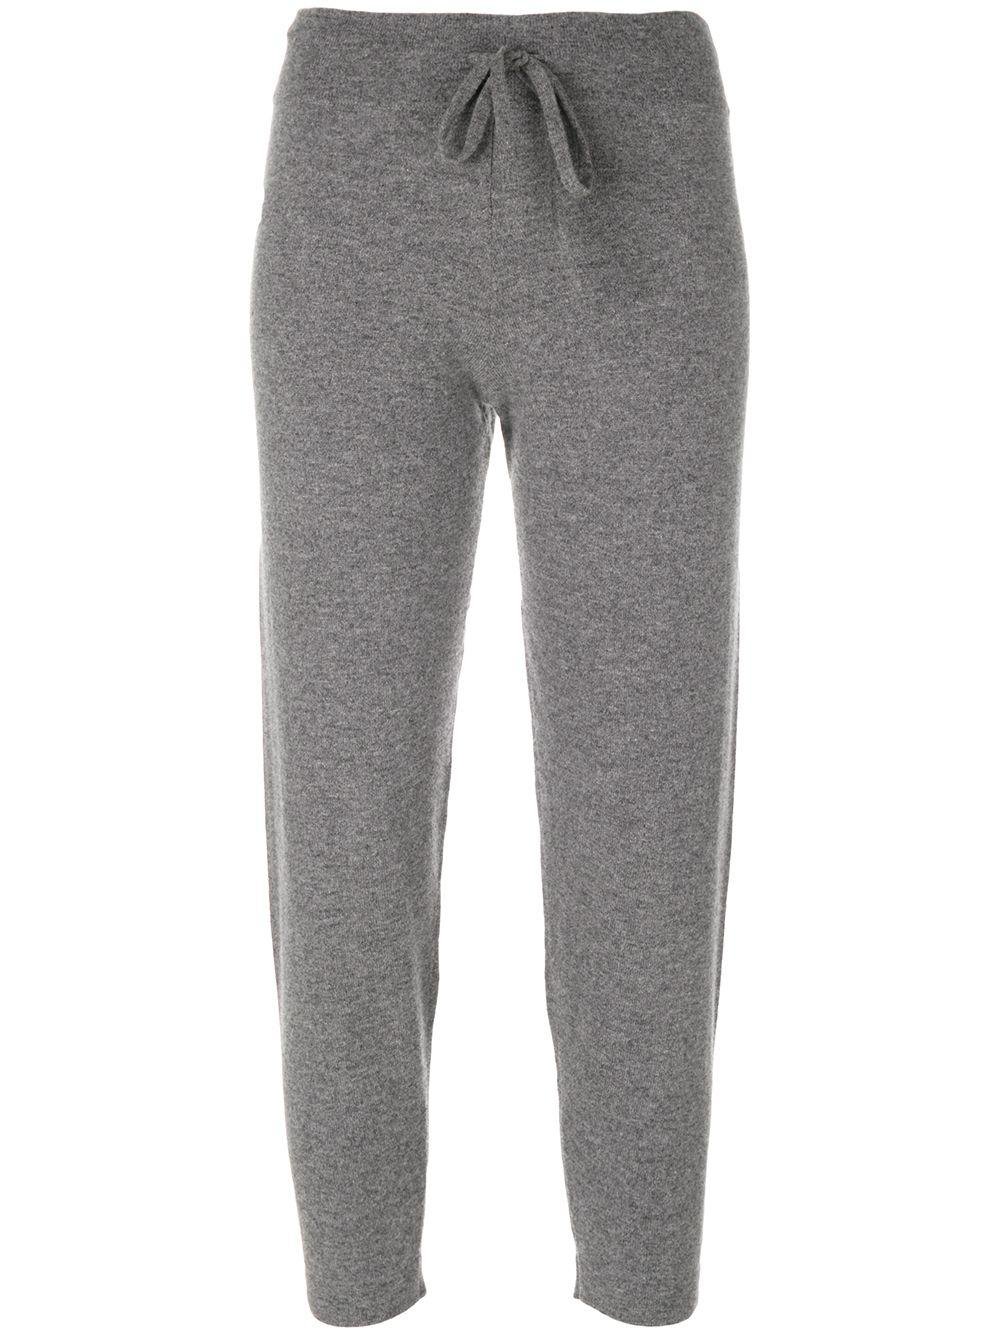 Sarah trousers by CASHMERE IN LOVE